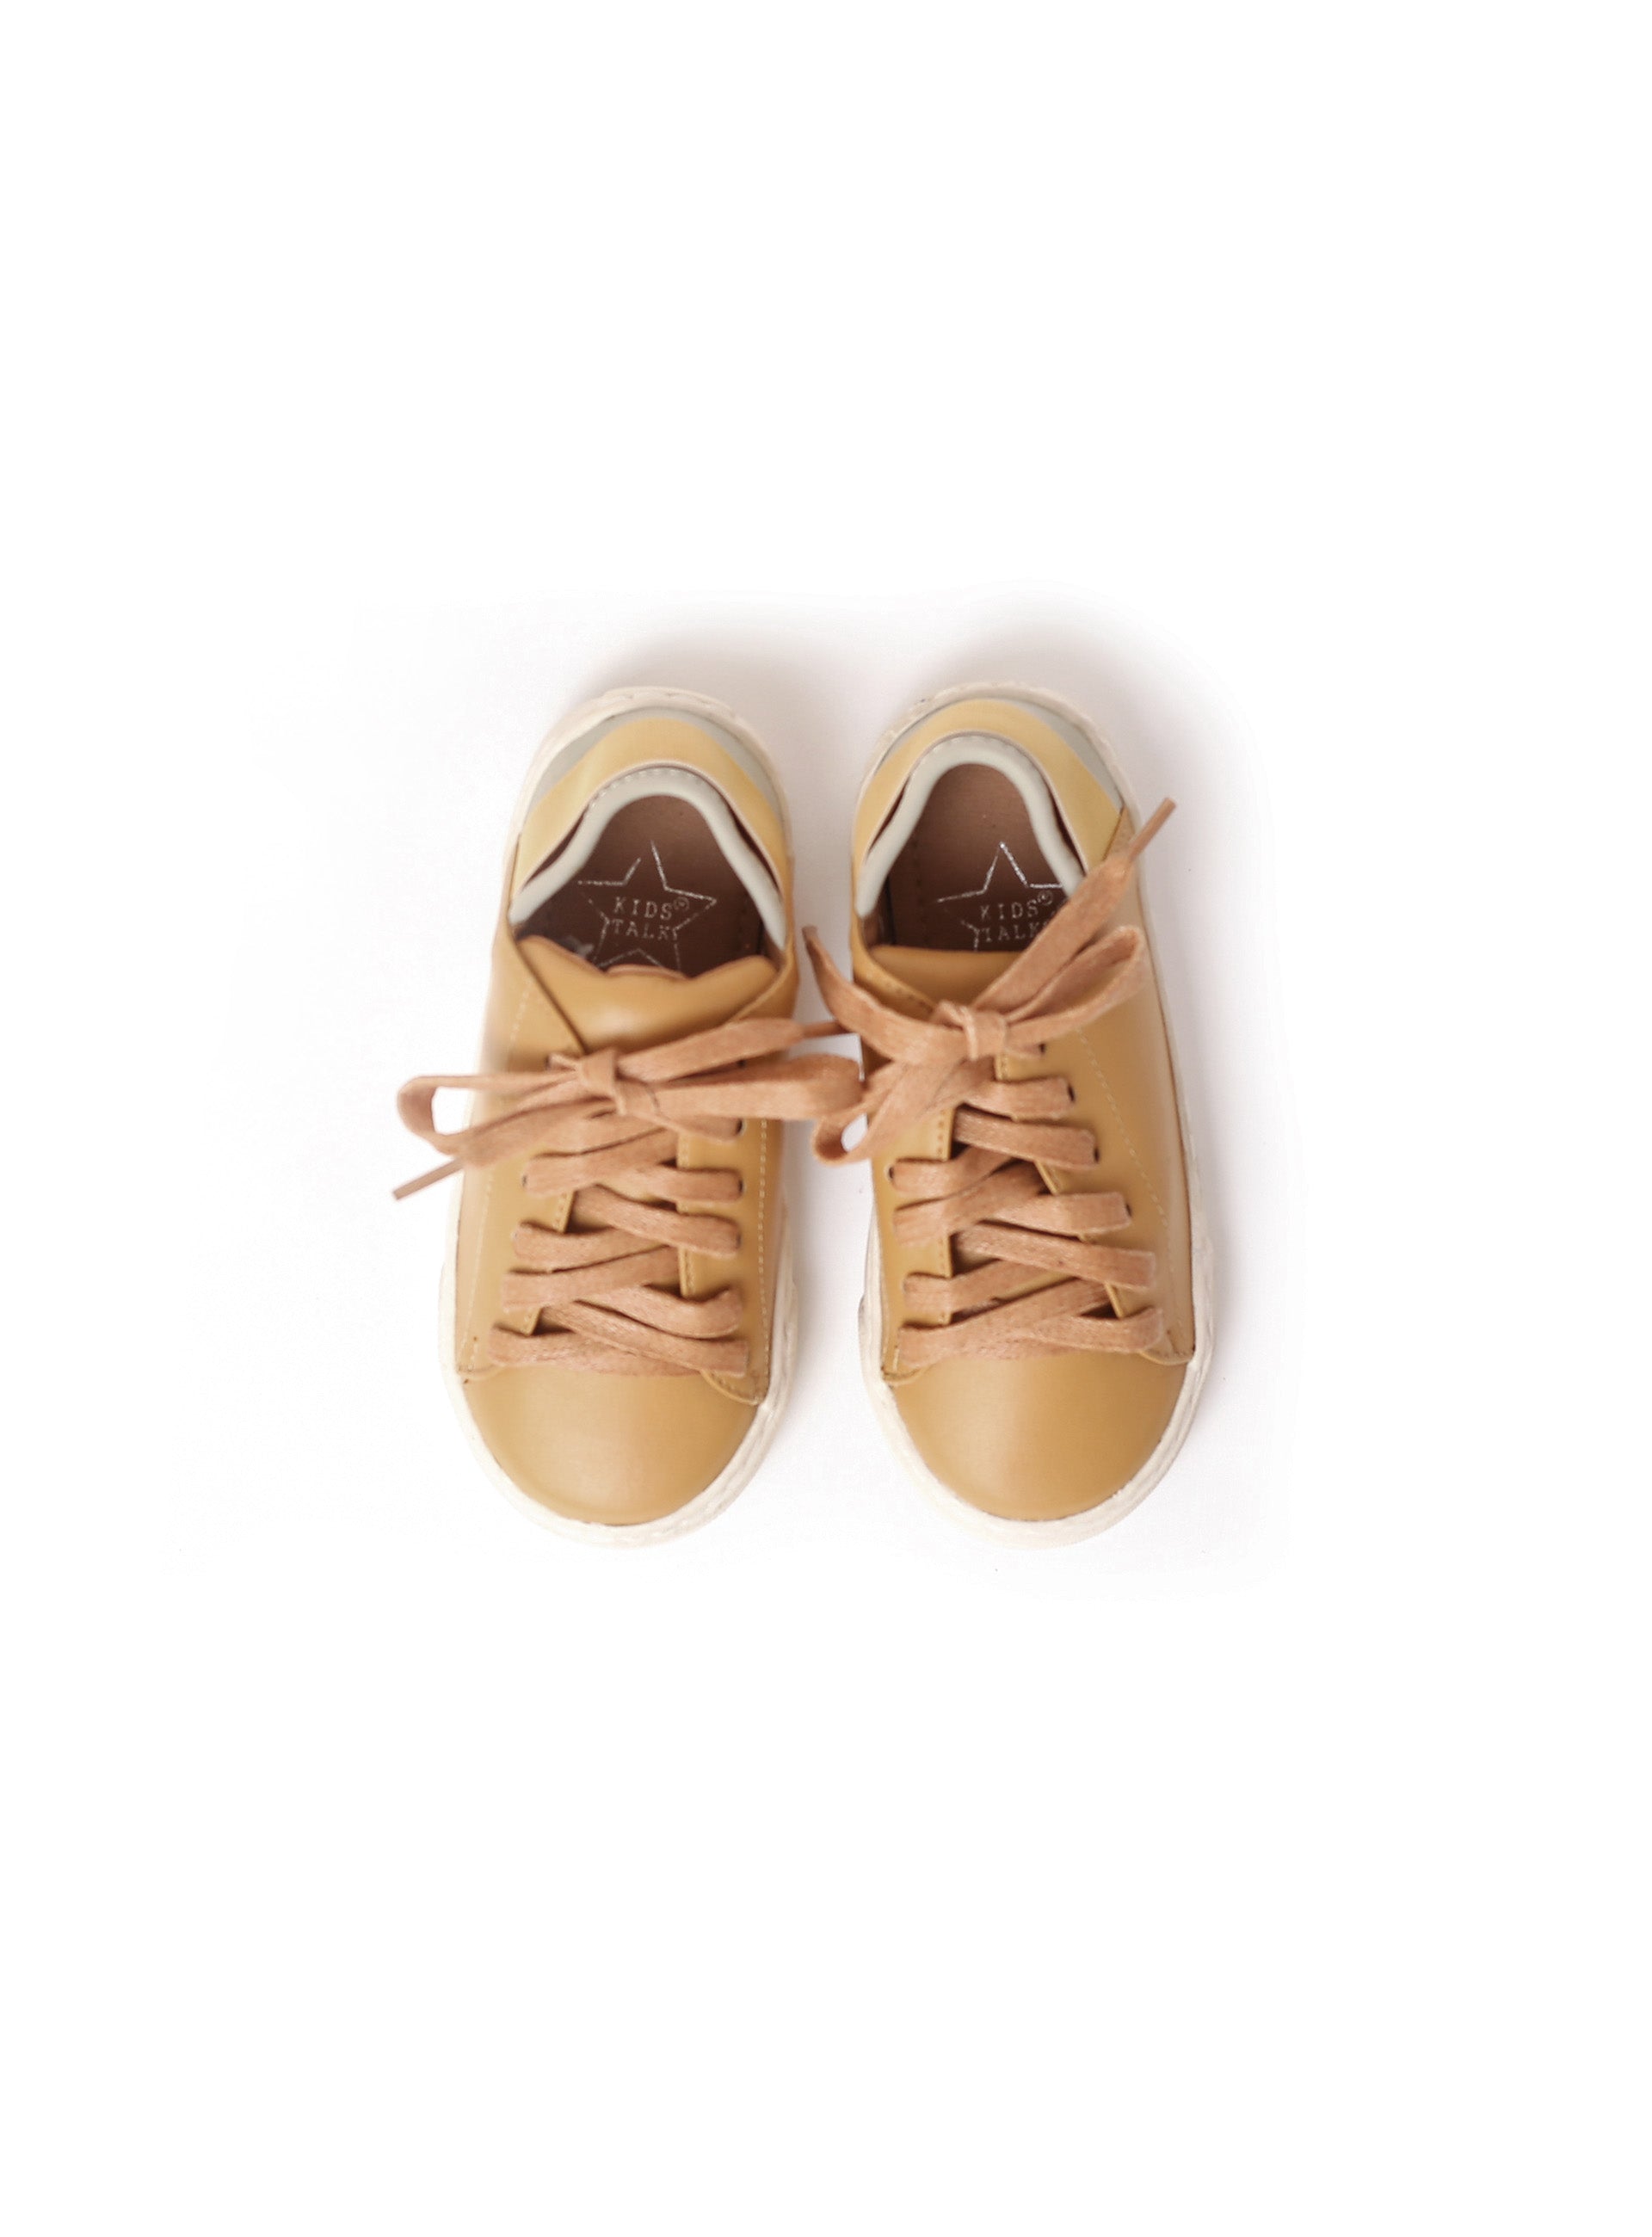 stretchable caramel corn sneakers